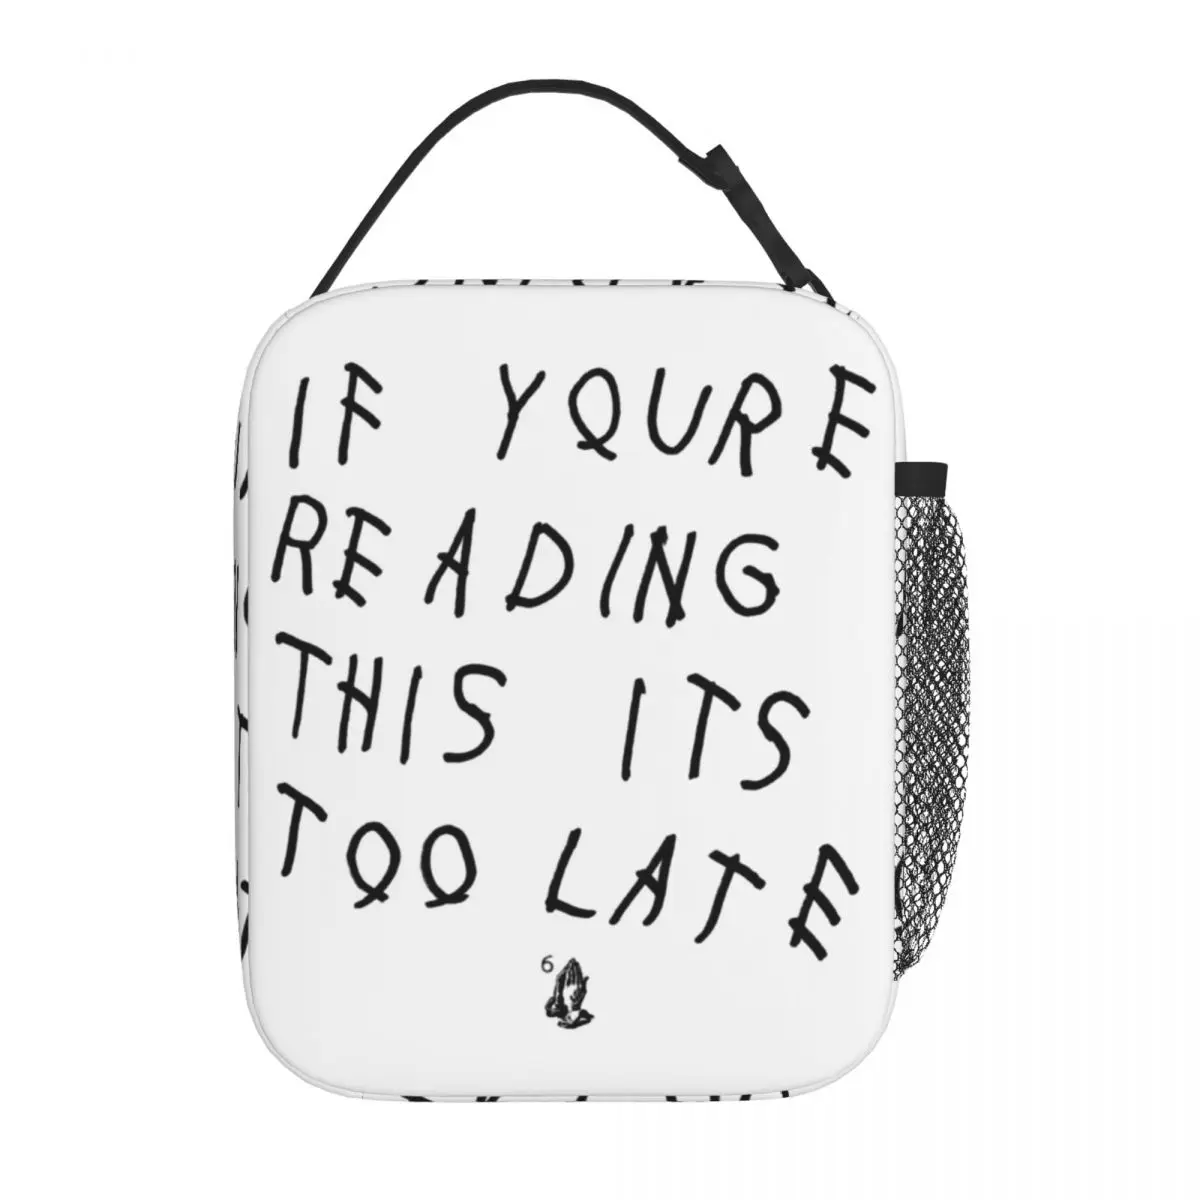 

Drake If You're Reading This It's Too Late Product Insulated Lunch Bag School Food Box New Arrival Thermal Cooler Bento Box